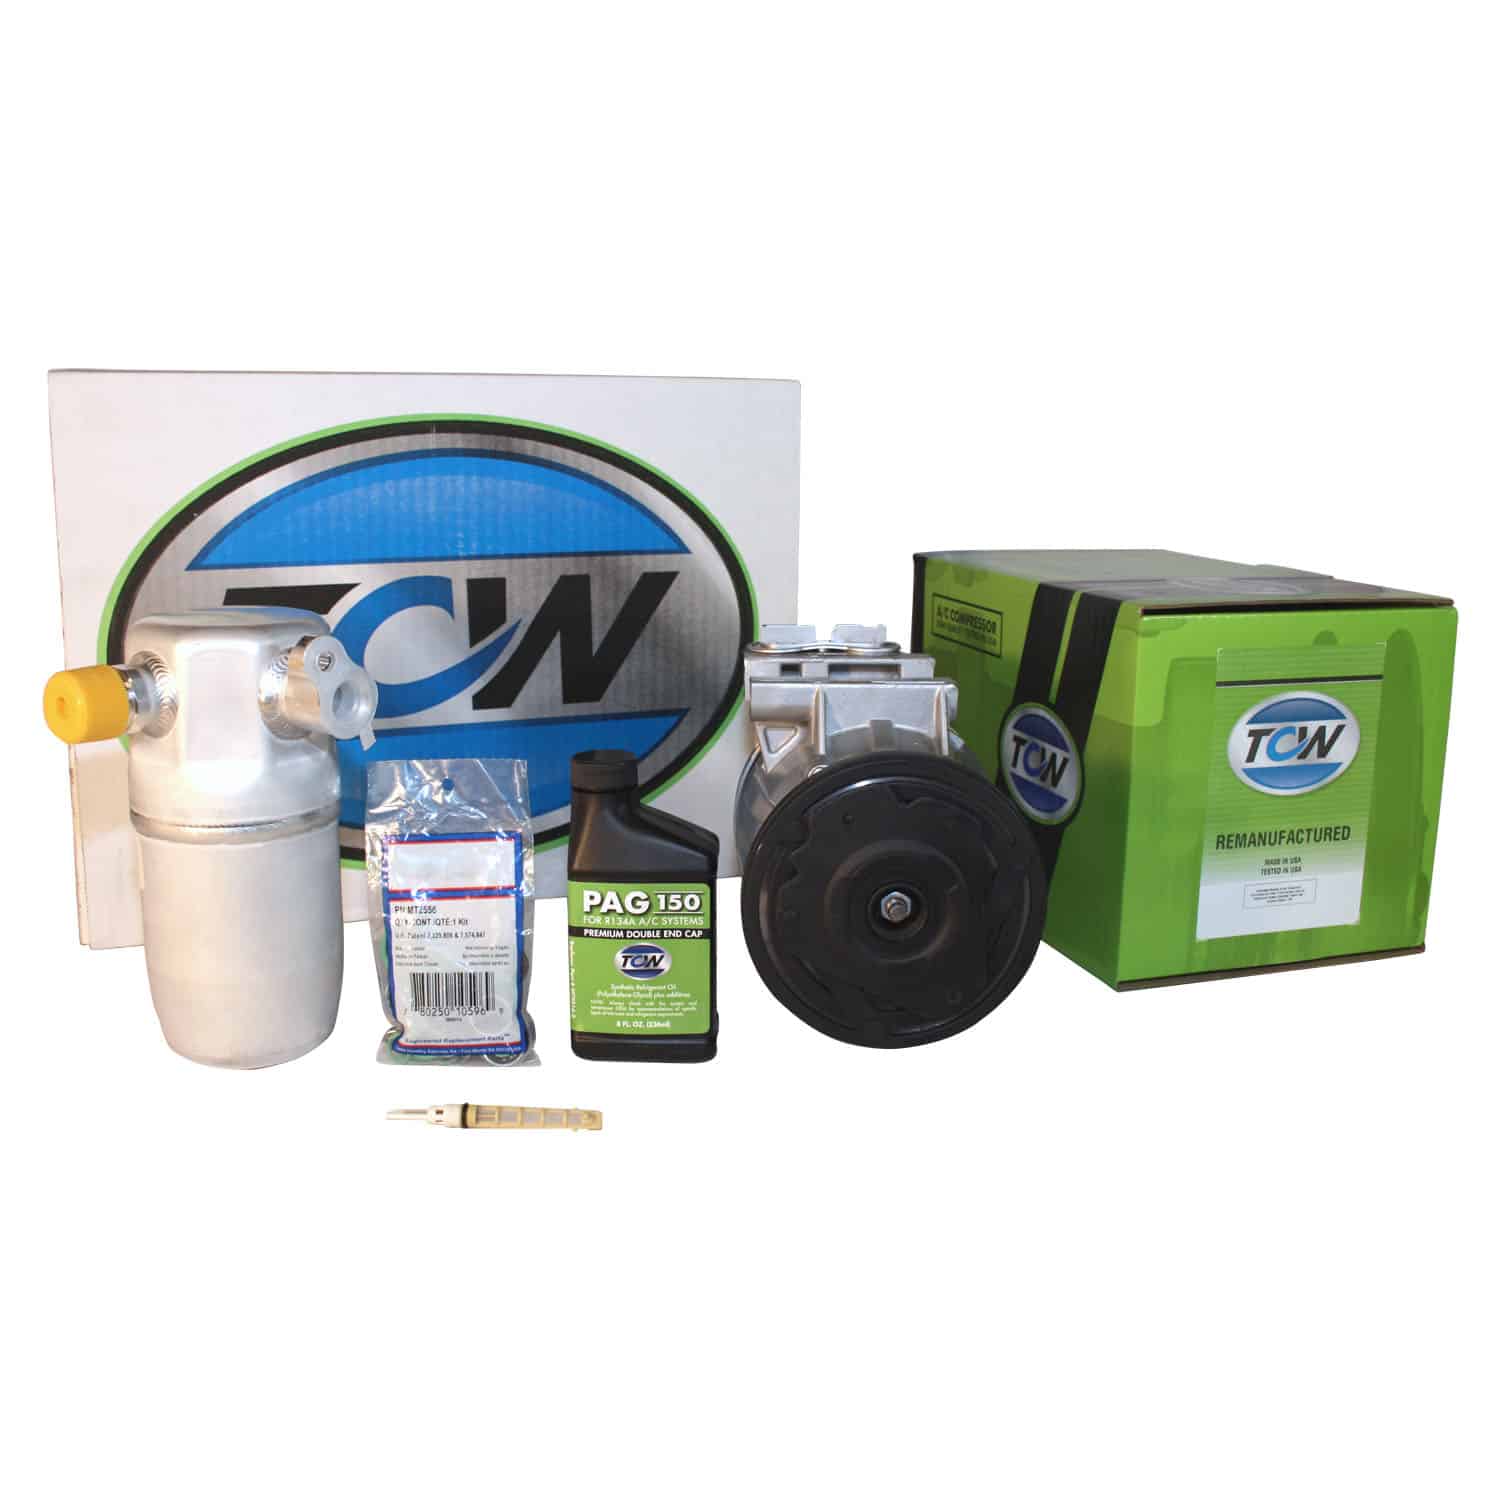 TCW Vehicle A/C Kit K1000361R Remanufactured Product Image field_60b6a13a6e67c